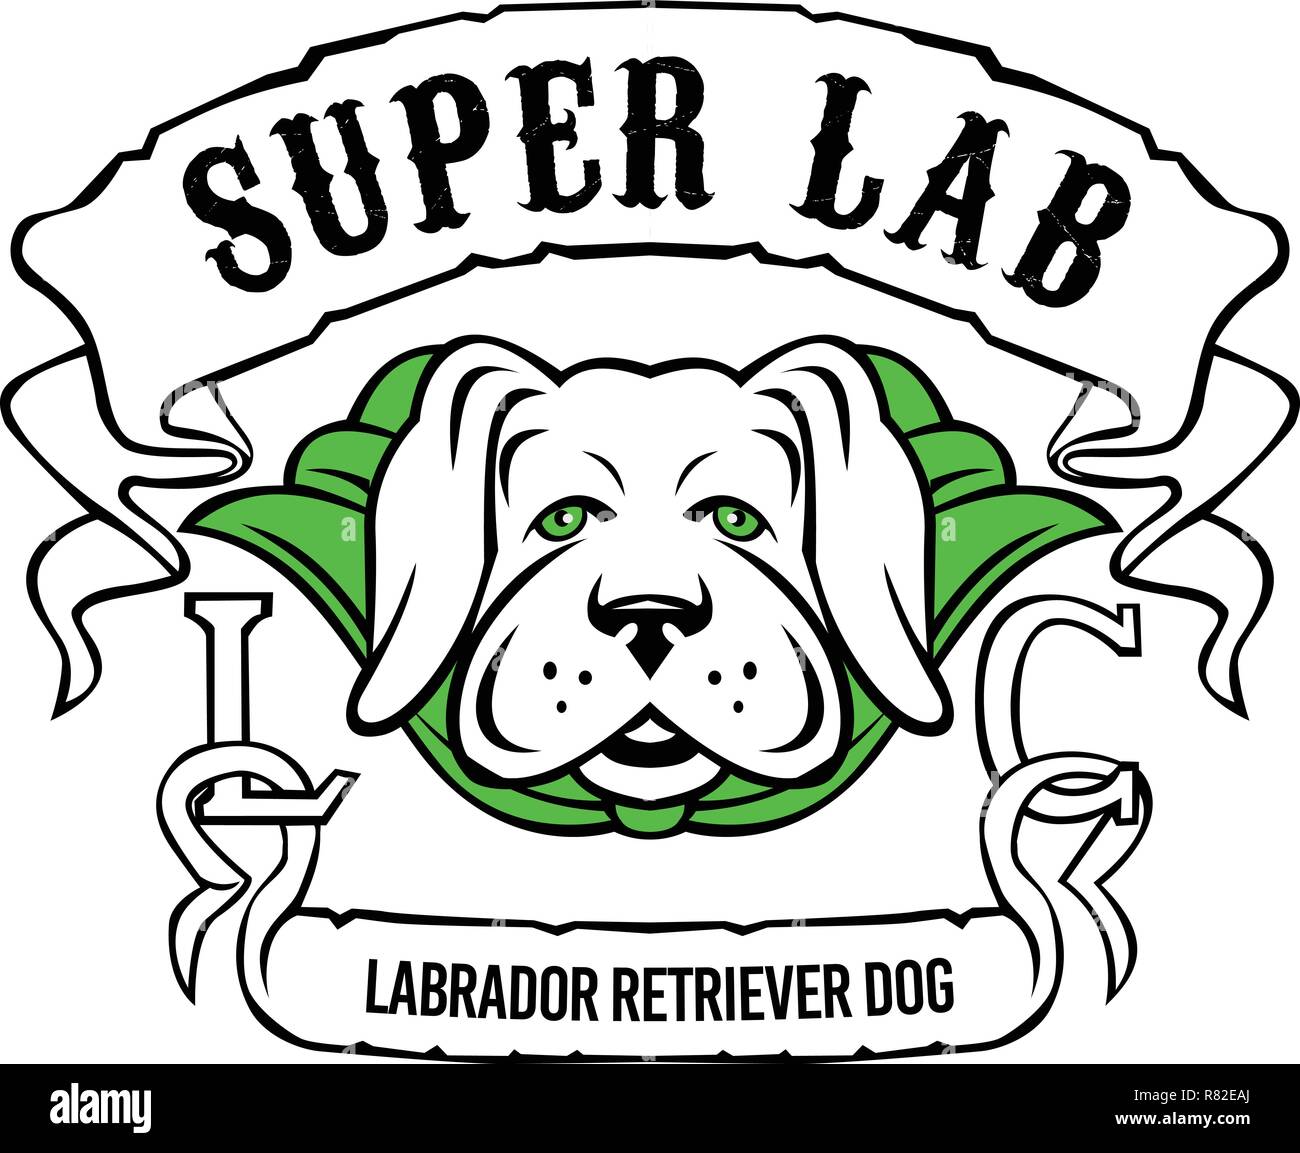 Motorcycle or biker gang style illustration of a super yellow labrador retriever dog wearing a green cape front view with ribbon or scroll with text S Stock Vector